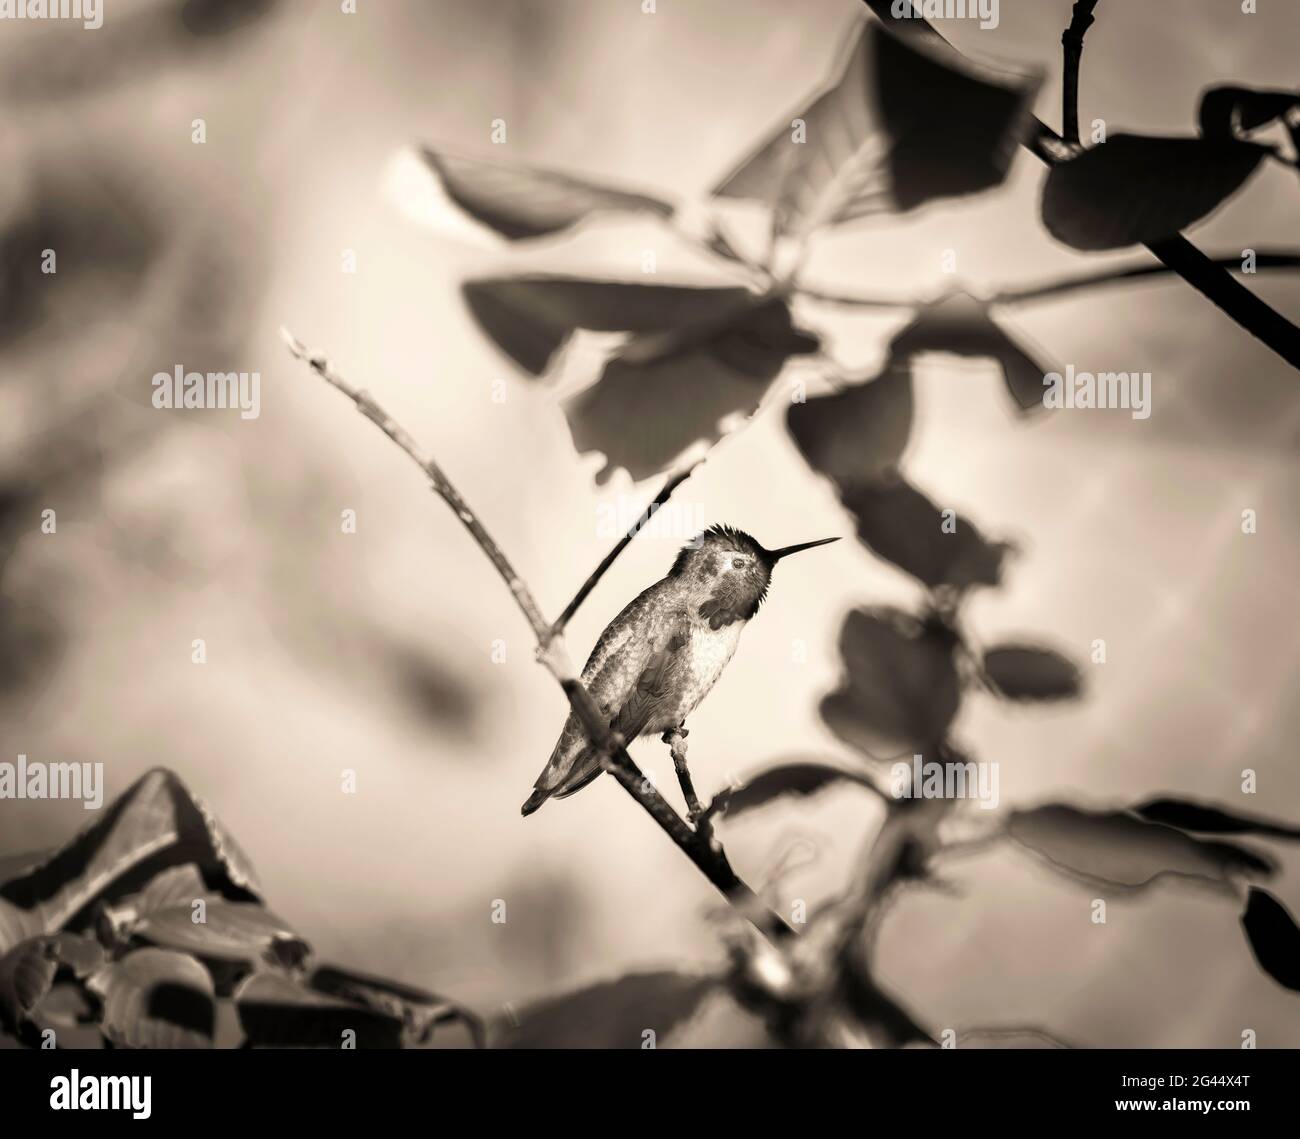 Hummingbird perching on twig in black and white Stock Photo